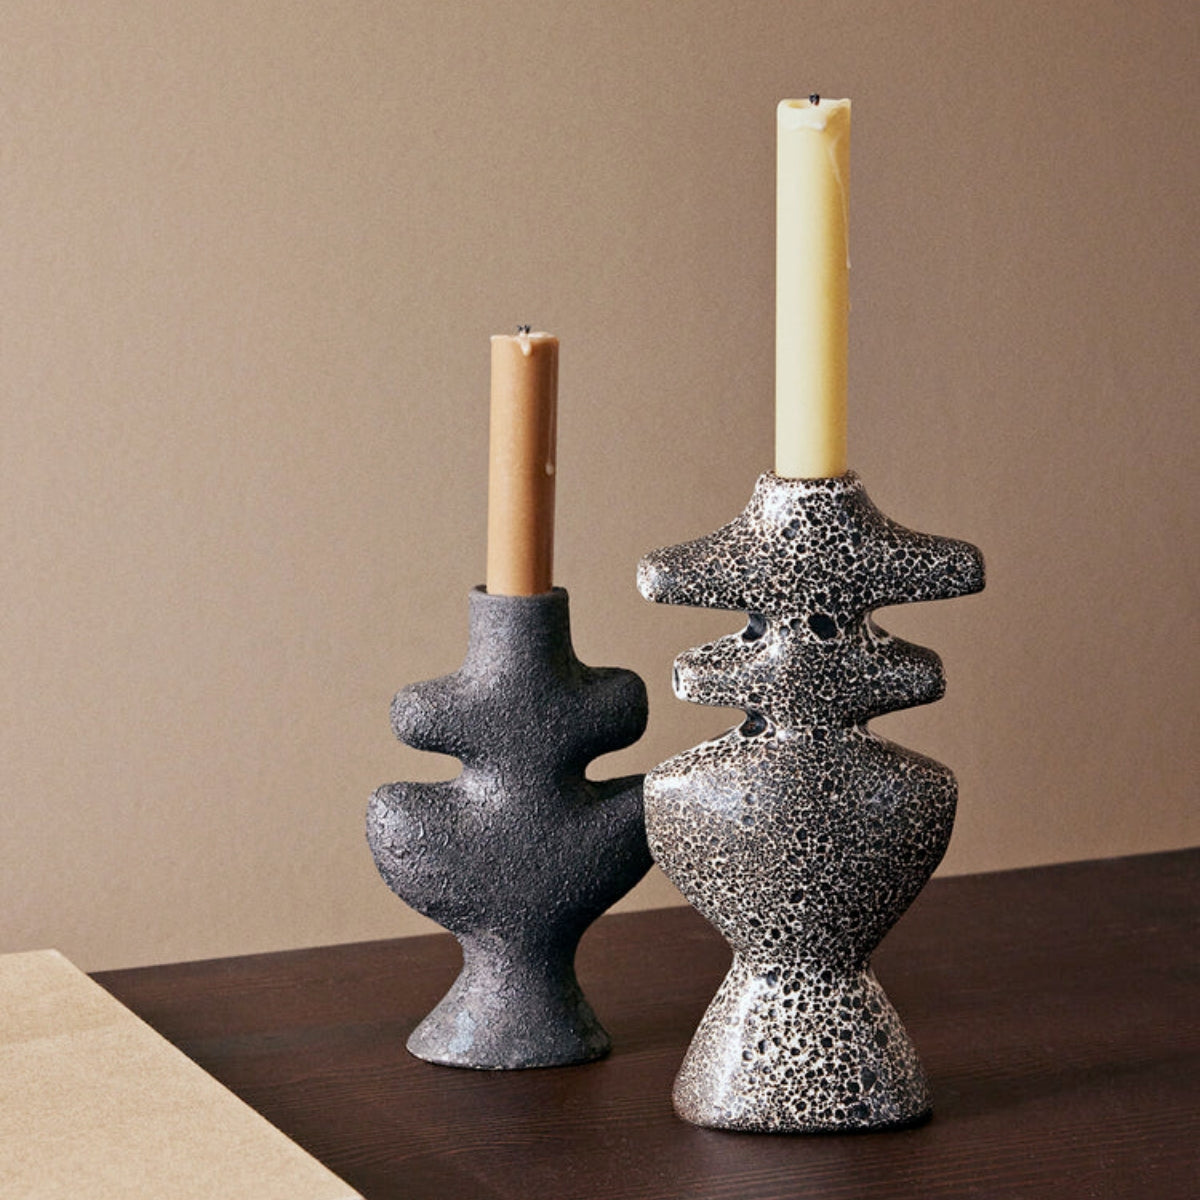 Yara Candle Holder Small Rustic Iron - ferm LIVING